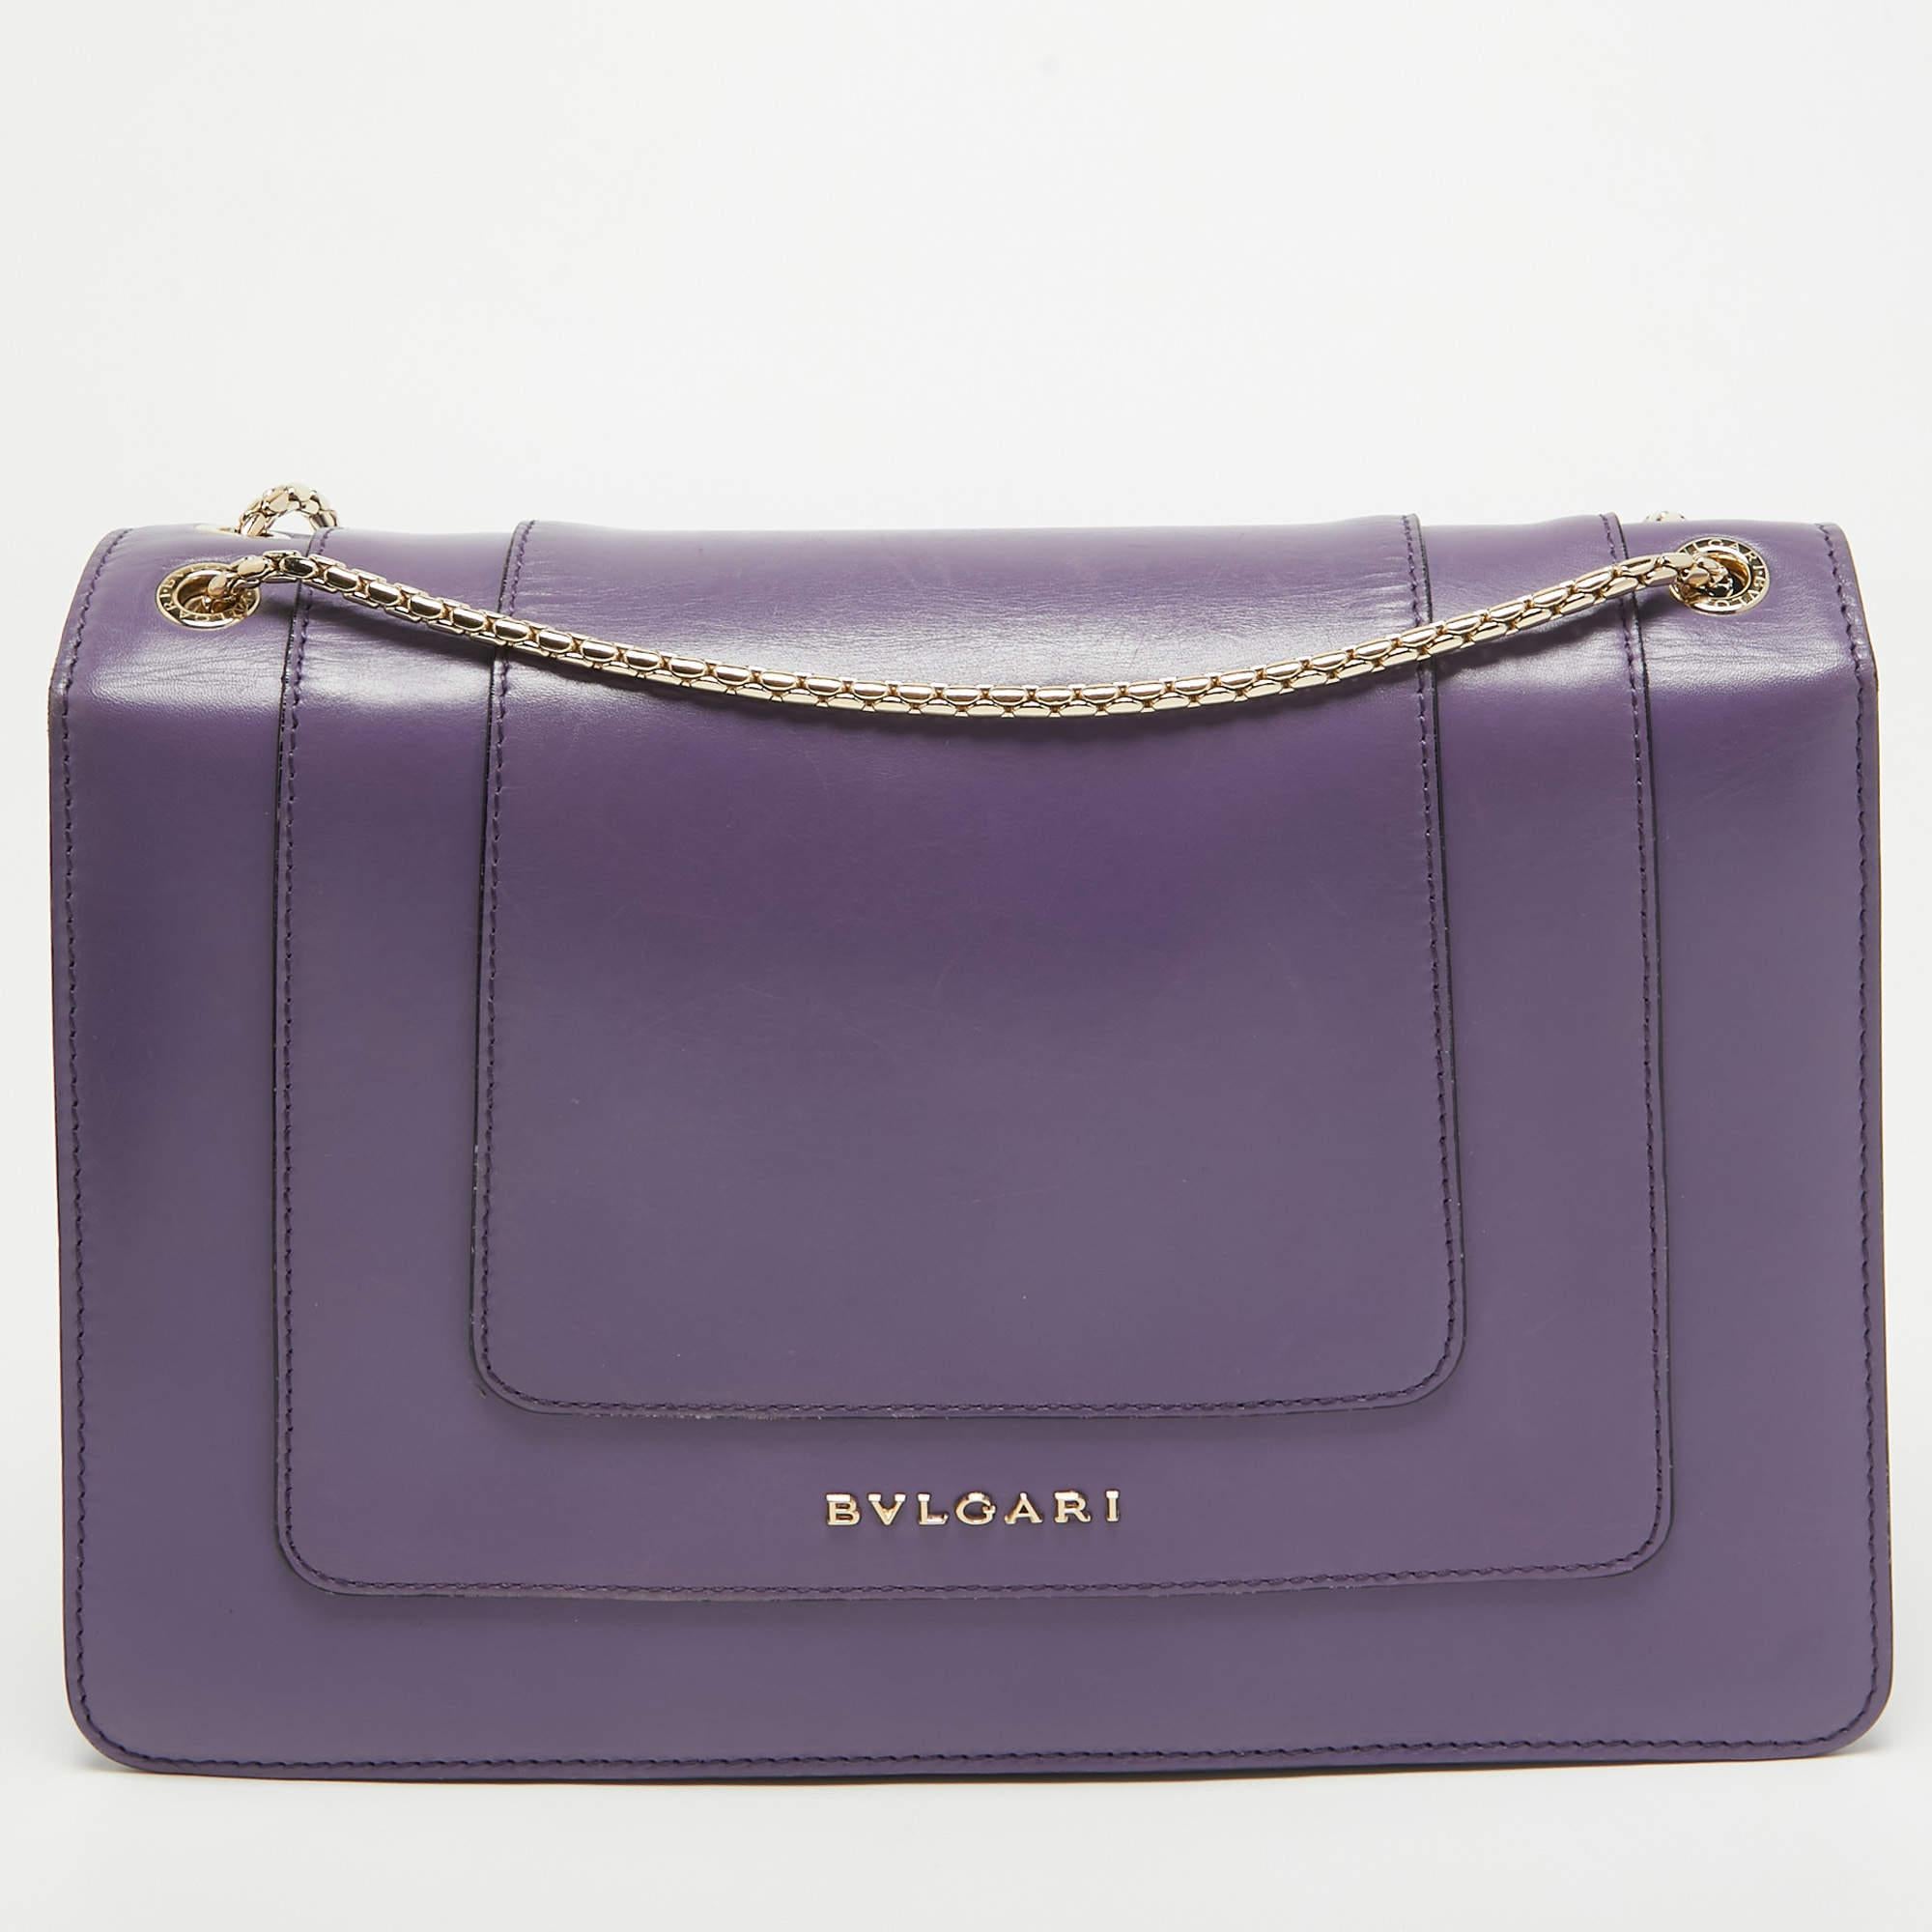 Most designs from Bvlgari, with their striking elements, pay tribute to the Roman roots, and this bag is no different. Made from leather, it is an accessory of utility and luxury. Perfectly sized, the interior has enough room to dutifully store your